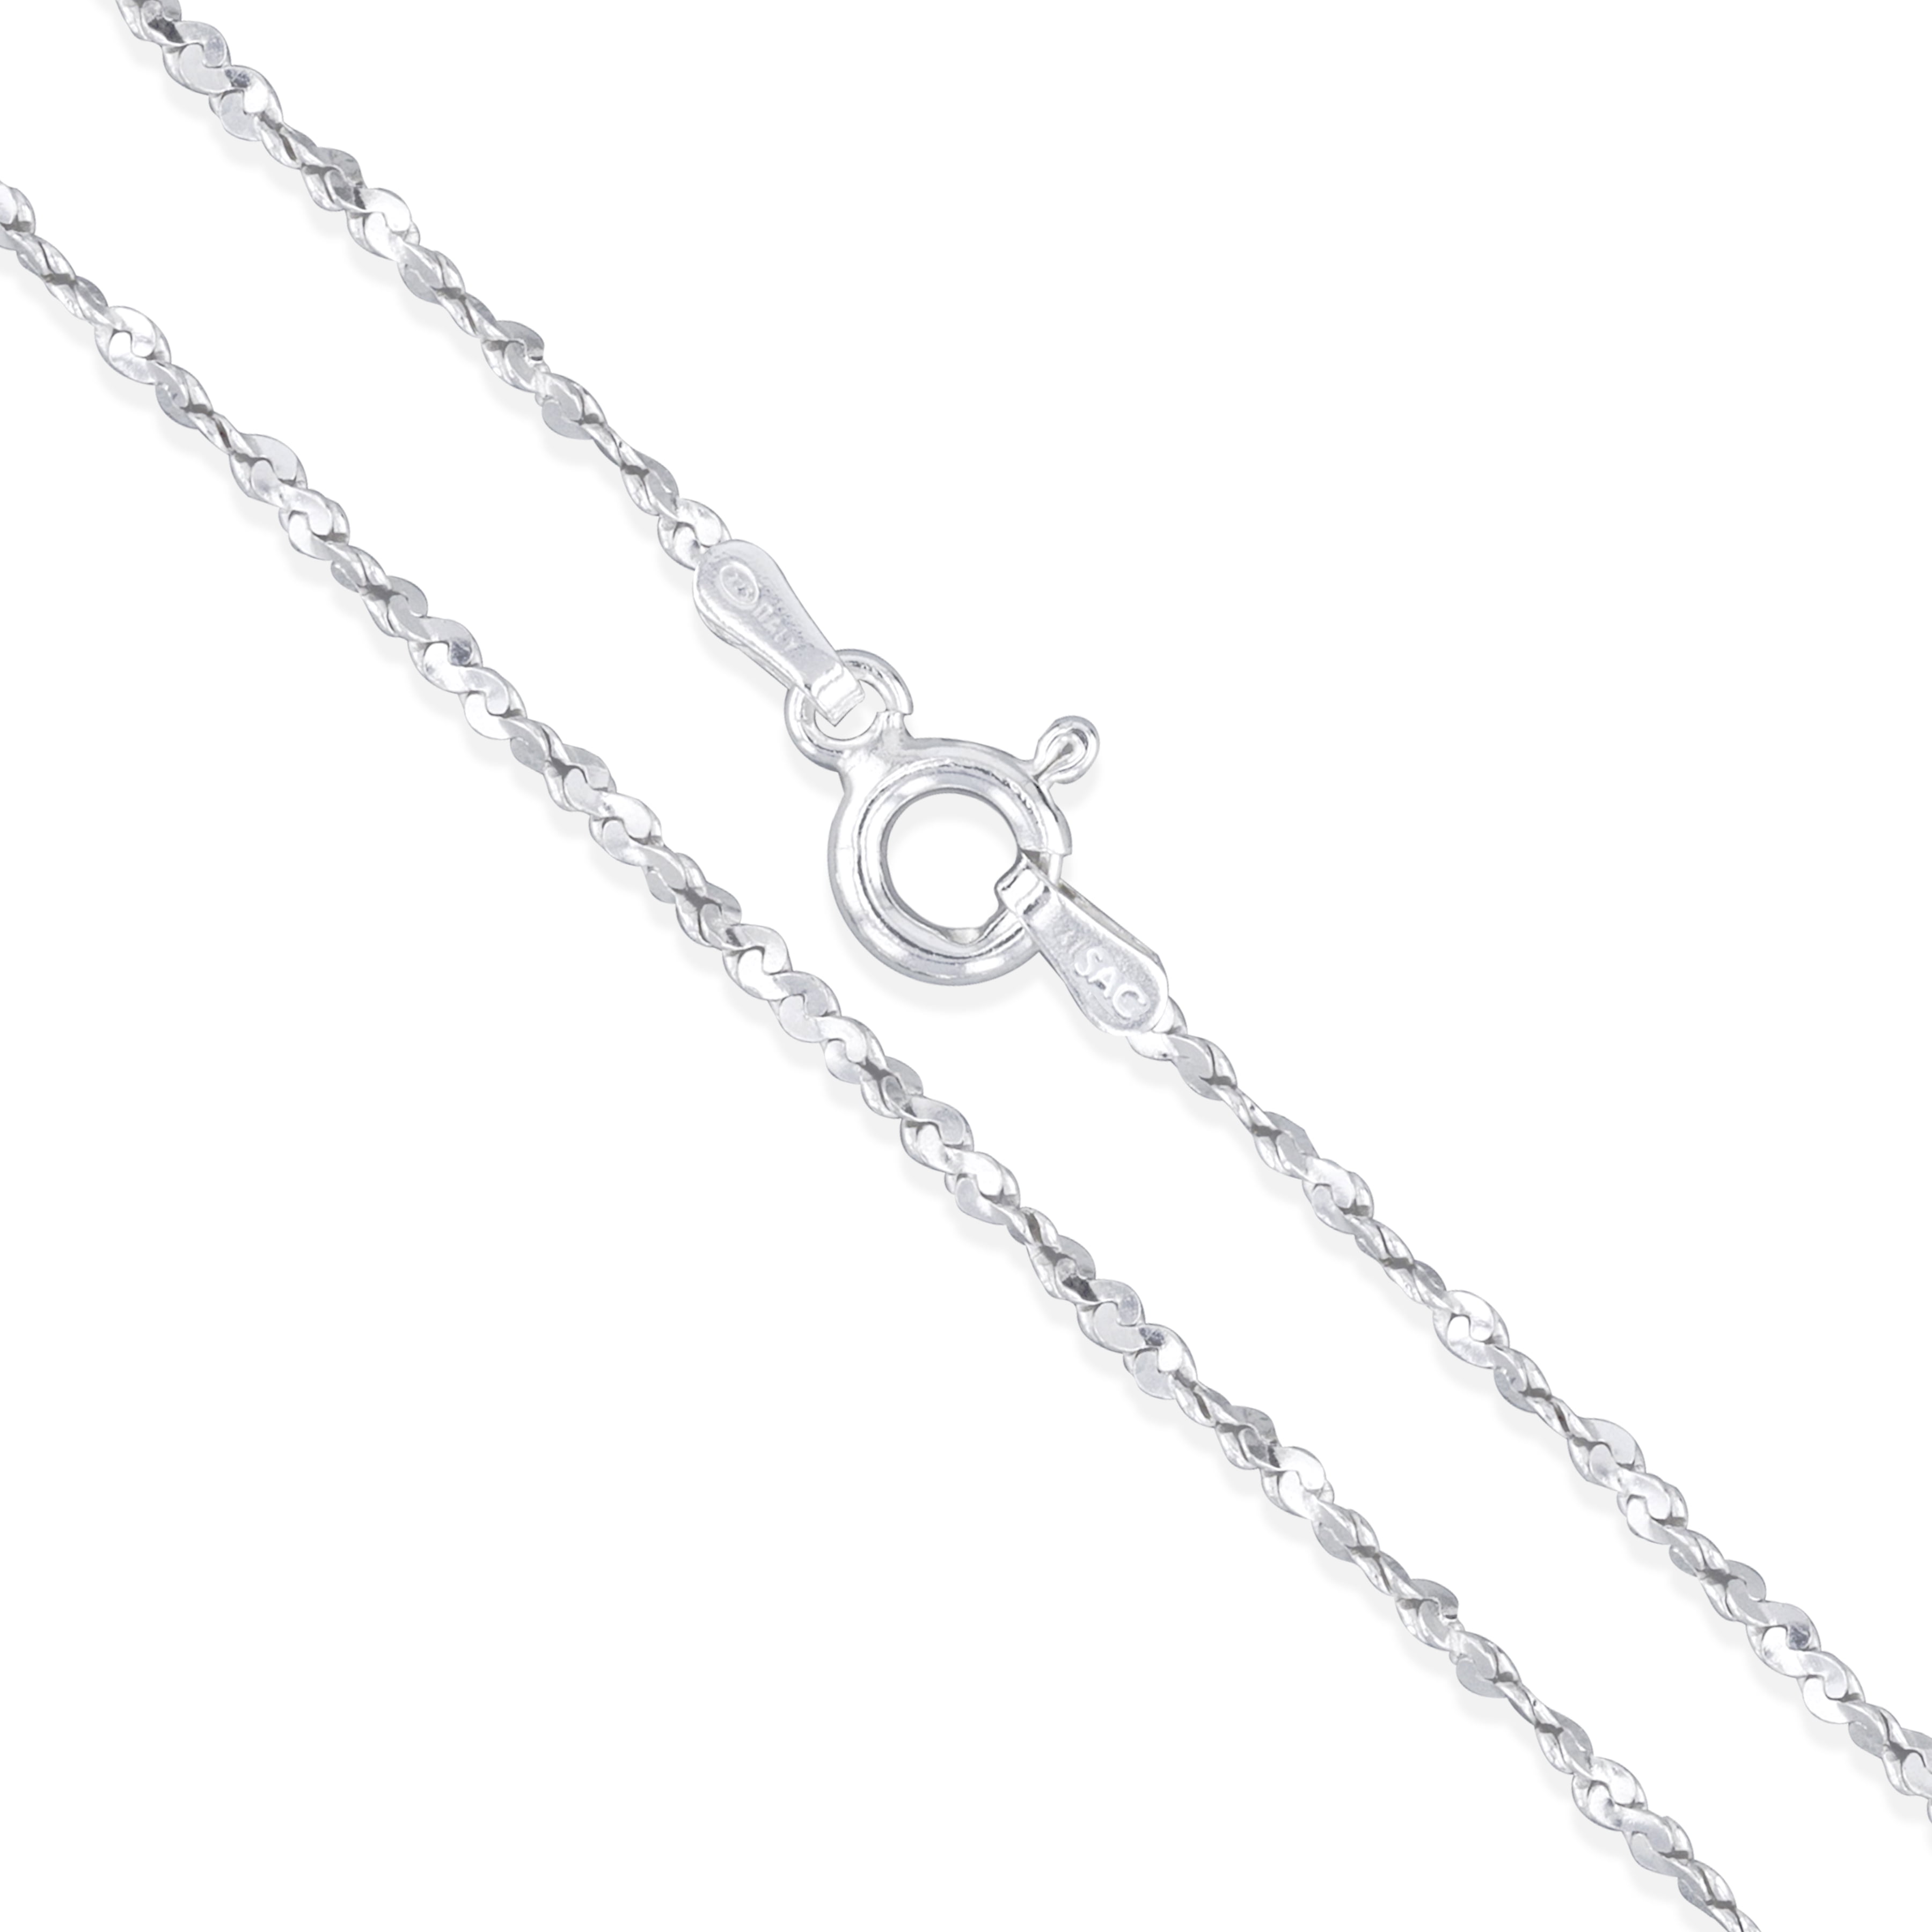 1.5 mm L 16 inches 40 cm New 60 14K Solid White Gold Rope Chain 3.1 Grams W